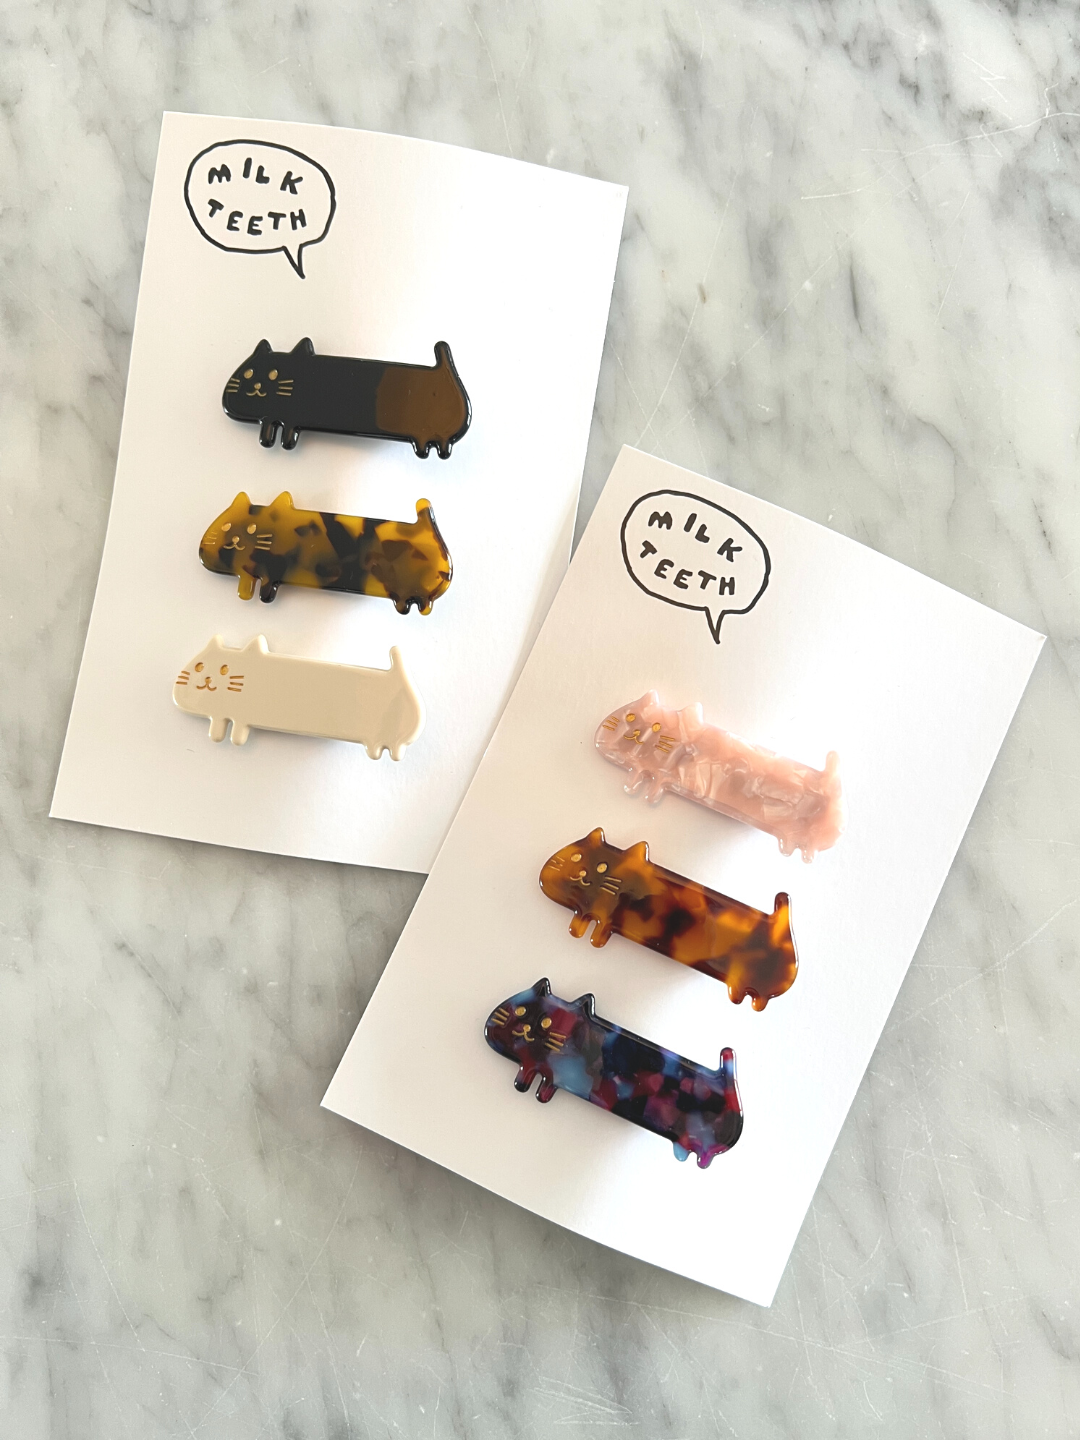 Two Milk Teeth presentation cards each with three kids' barrettes in the shape of elongated cats; one set black, tortoiseshell and white, one set pink, ginger and purple